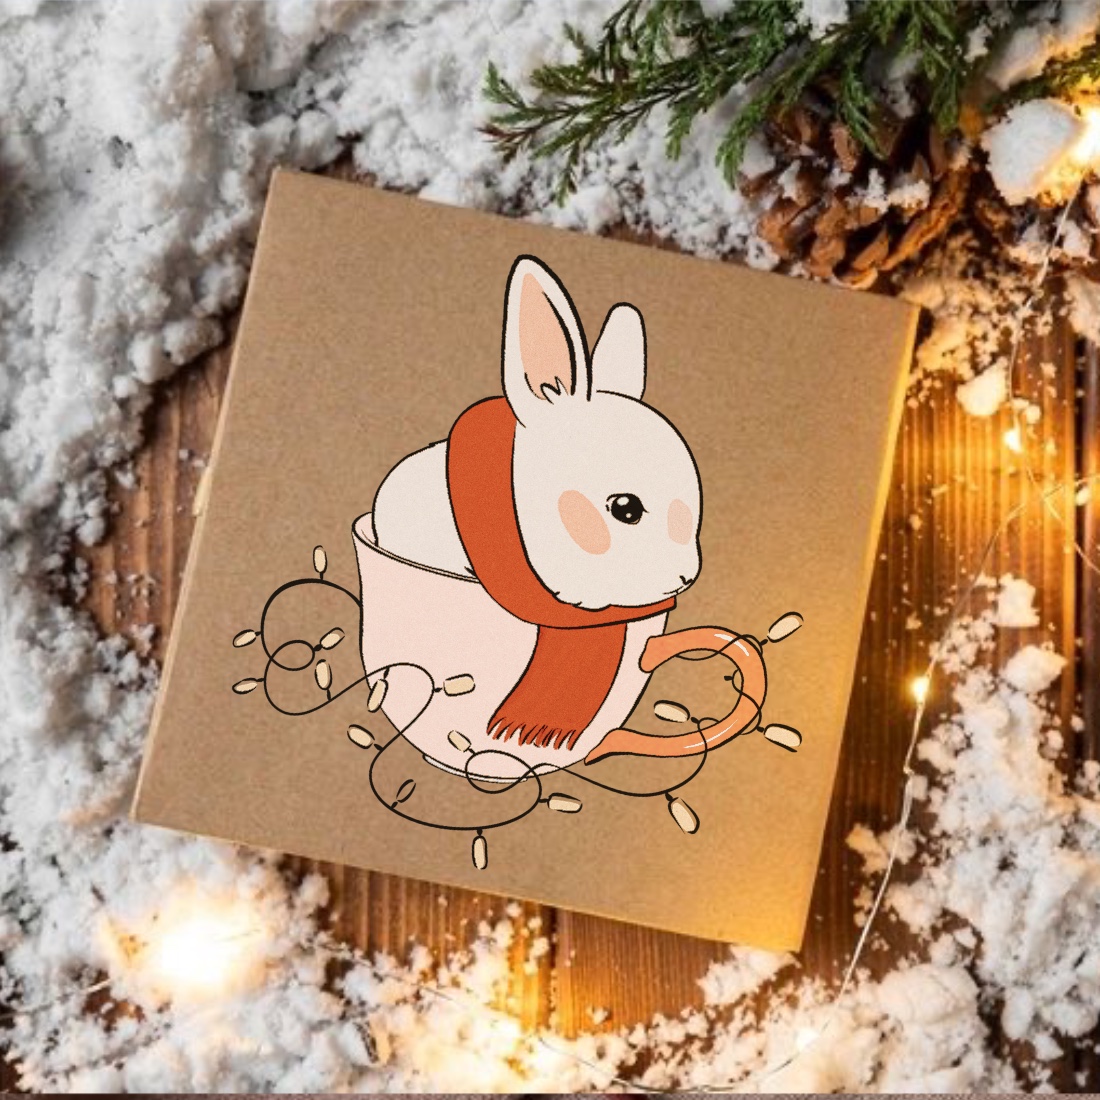 Cute small rabbit on a beige paper package.